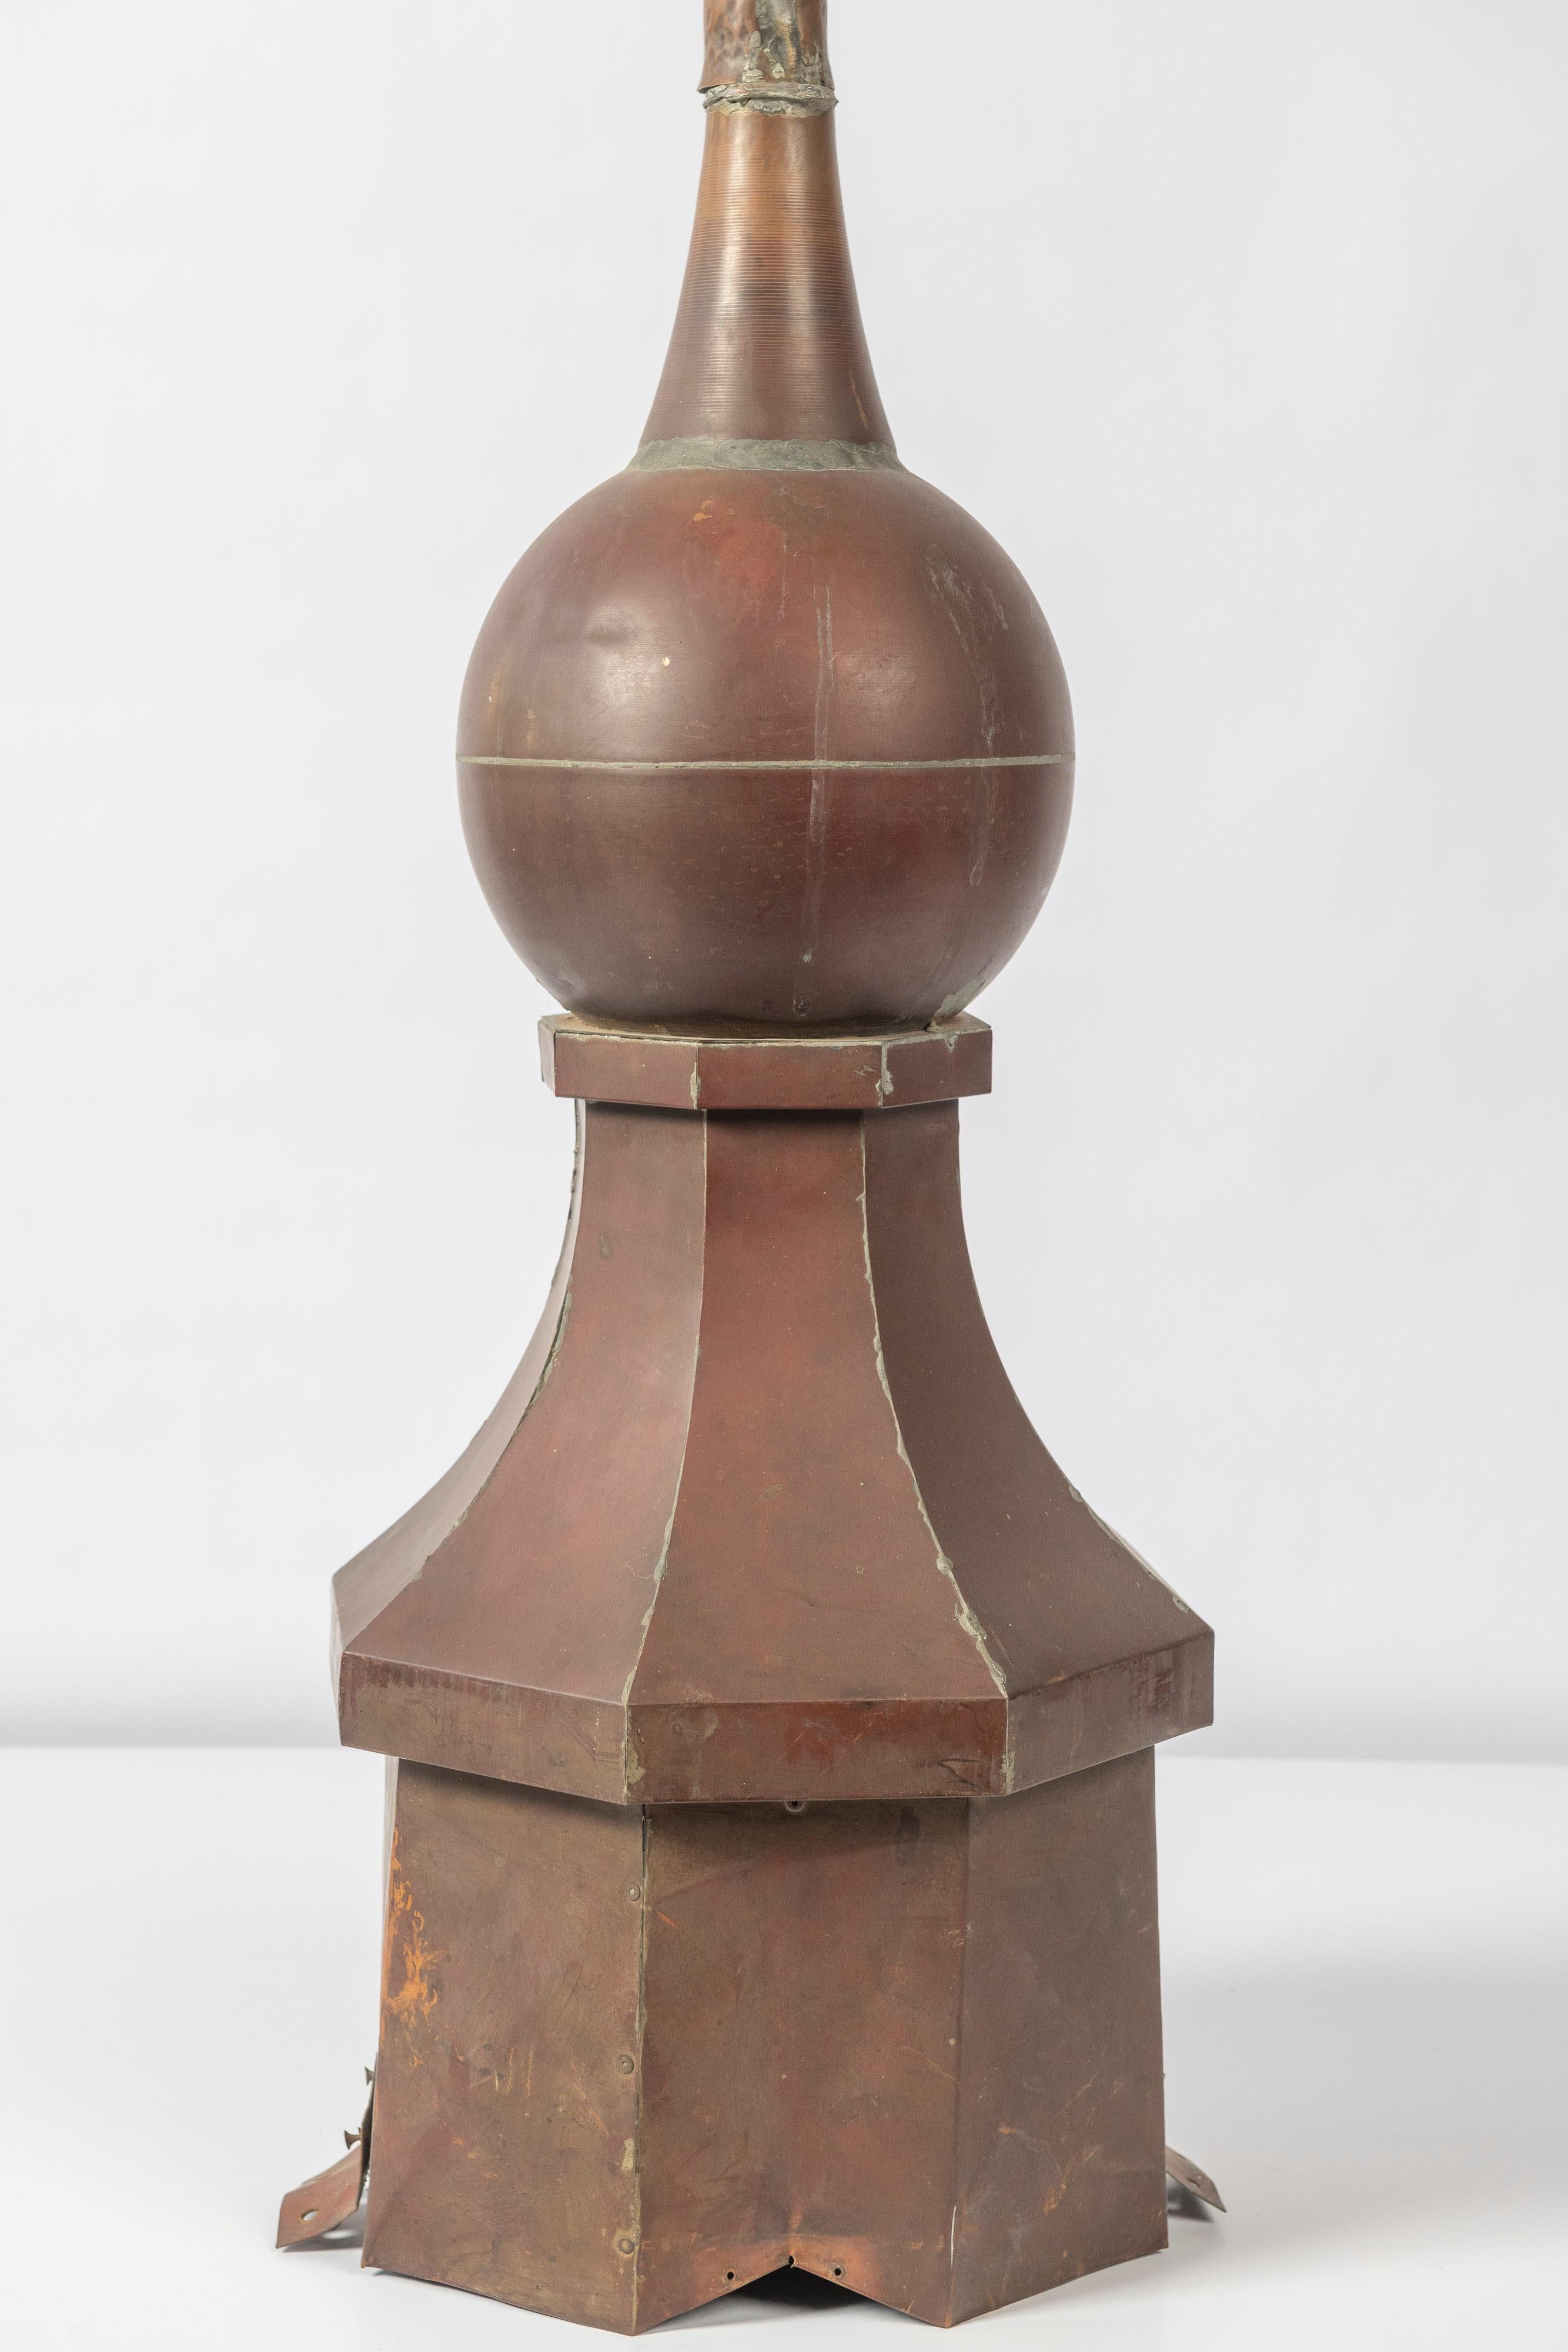 The antique architectural copper spire is in a conical shape, tapering to the hexagonal base, standing at 72